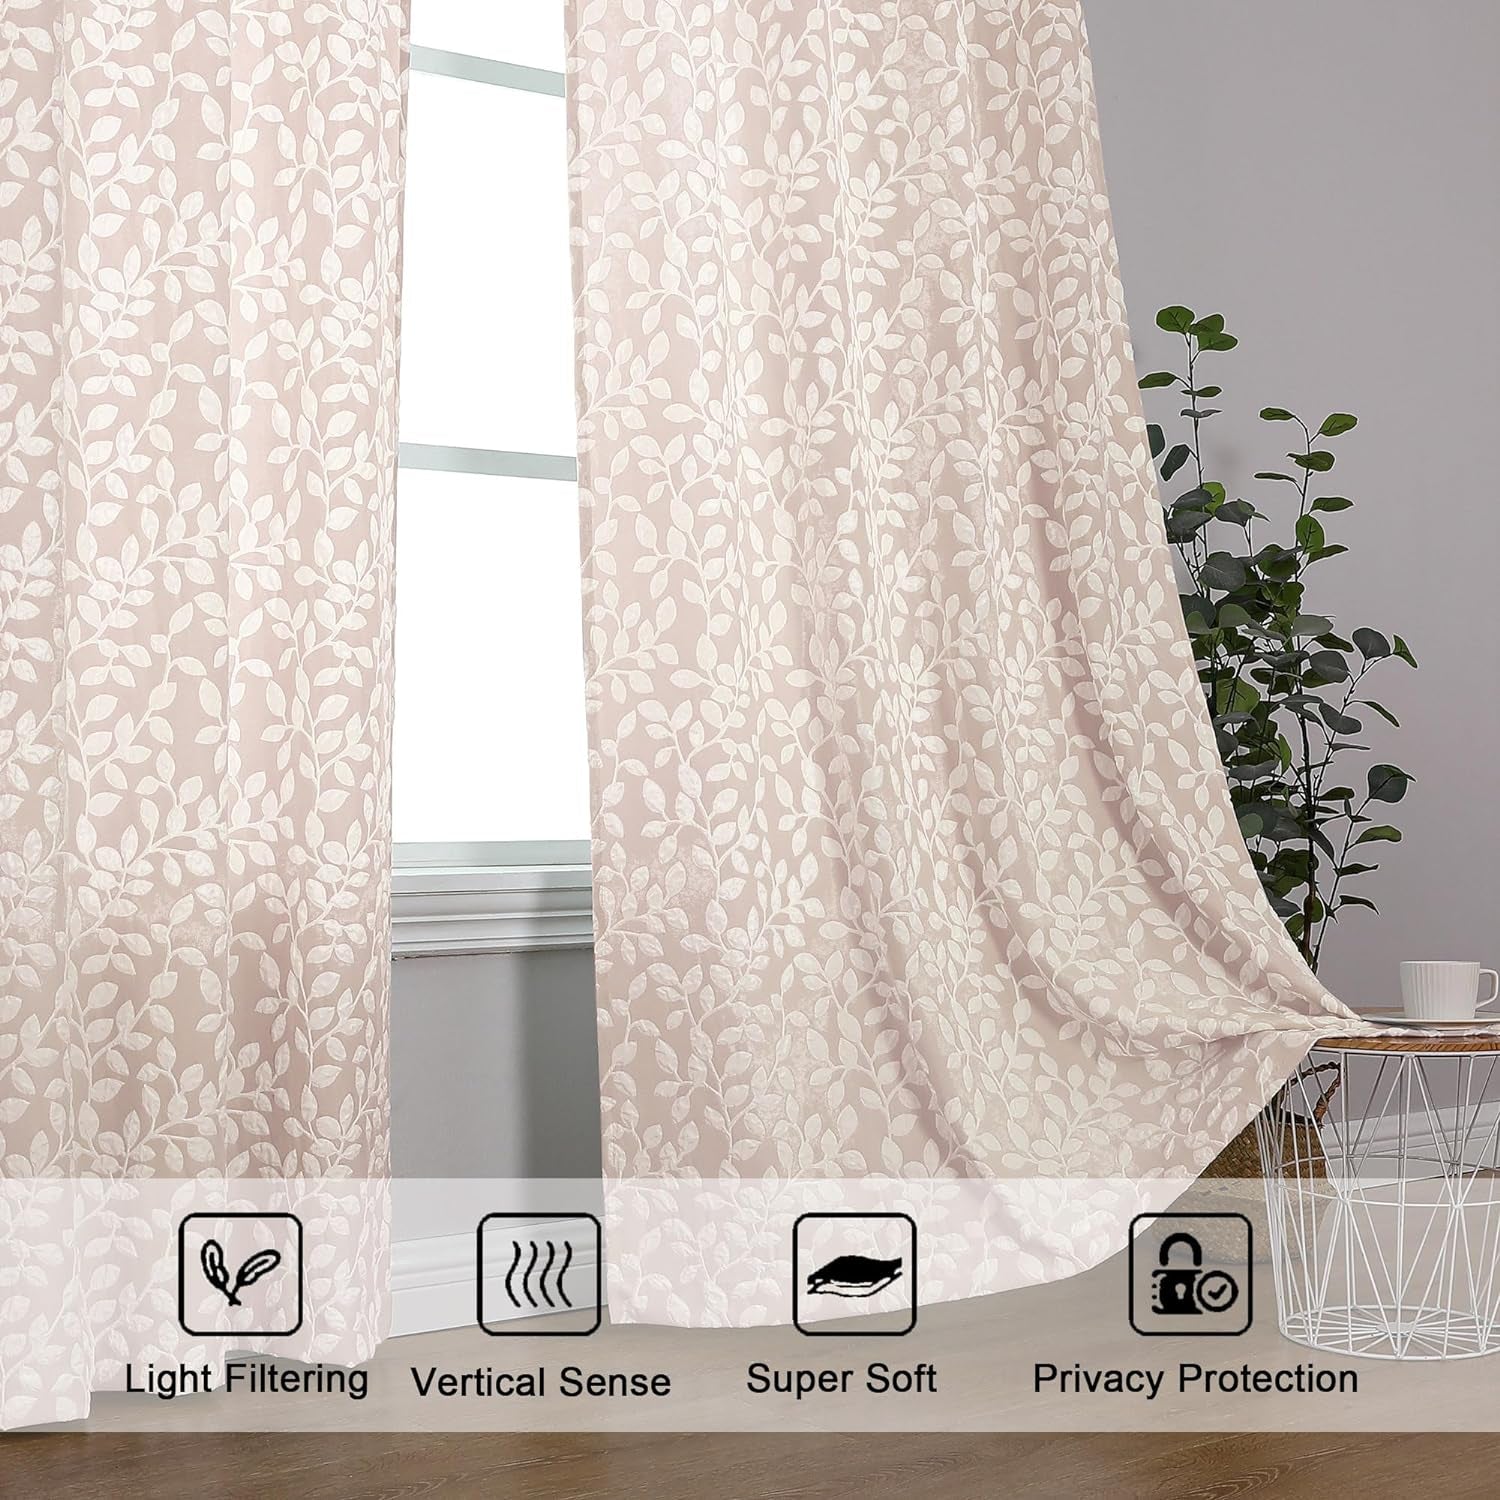 Chyhomenyc Anna White Taupe Curtains 63 Inch Length 2 Panels, Light Filtering Soft Airy 3D Embossed Textured Leaf Pattern Drapes for Bedroom Living Room Windows, Each 42Wx63L Inches  Chyhomenyc   